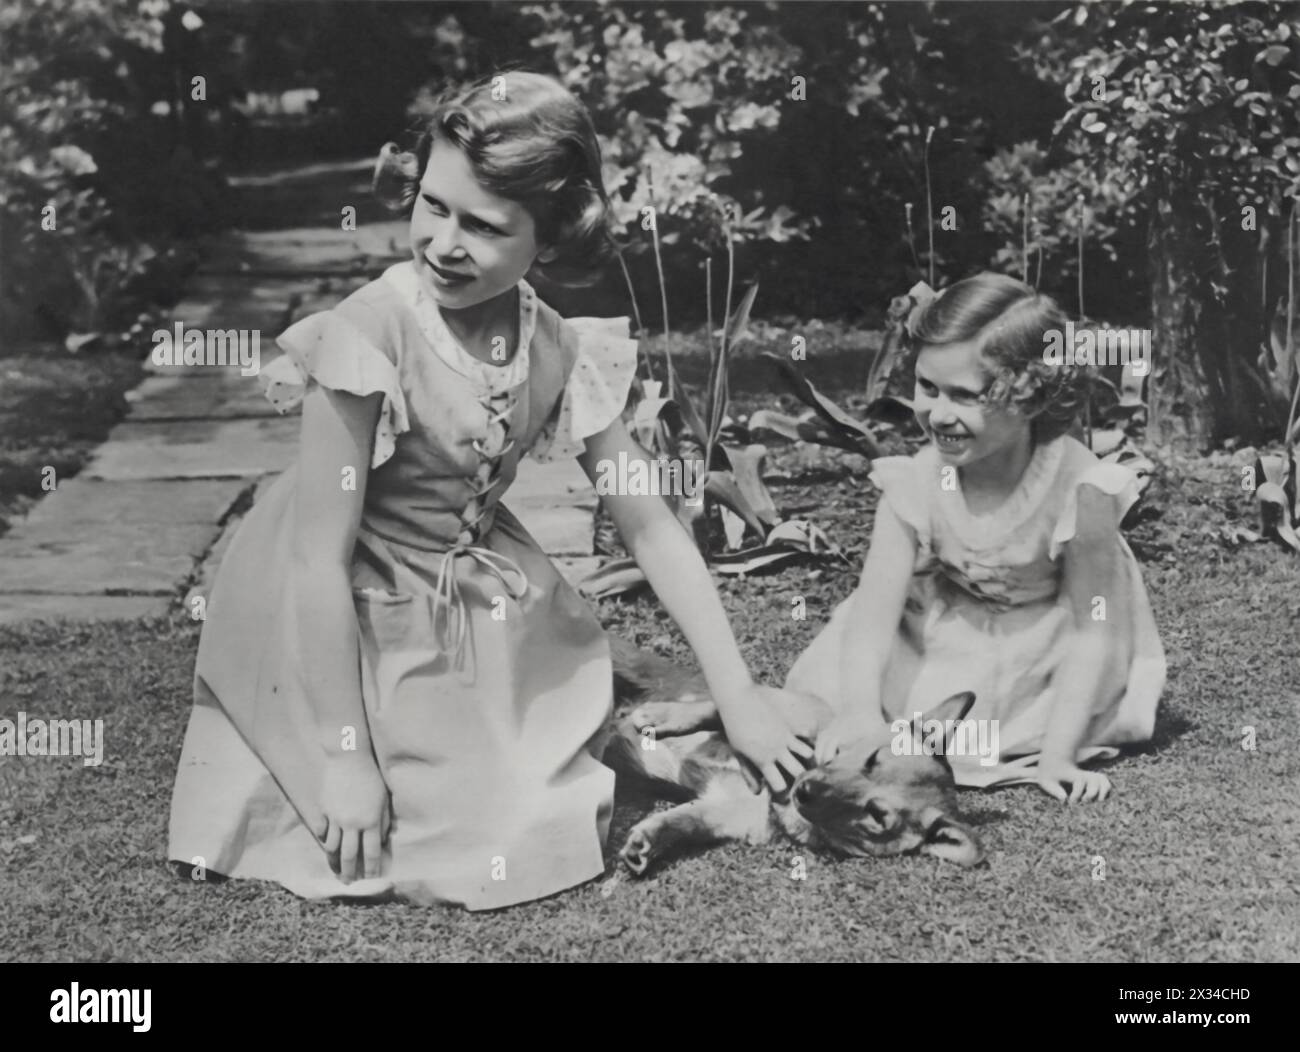 A young Princess Elizabeth, age 10, and Princess Margaret, age 6, are photographed together in the Royal Lodge, Windsor, dated 1936. This moment, captures the royal sisters during their early years, stroking one of their pet dogs. Stock Photo